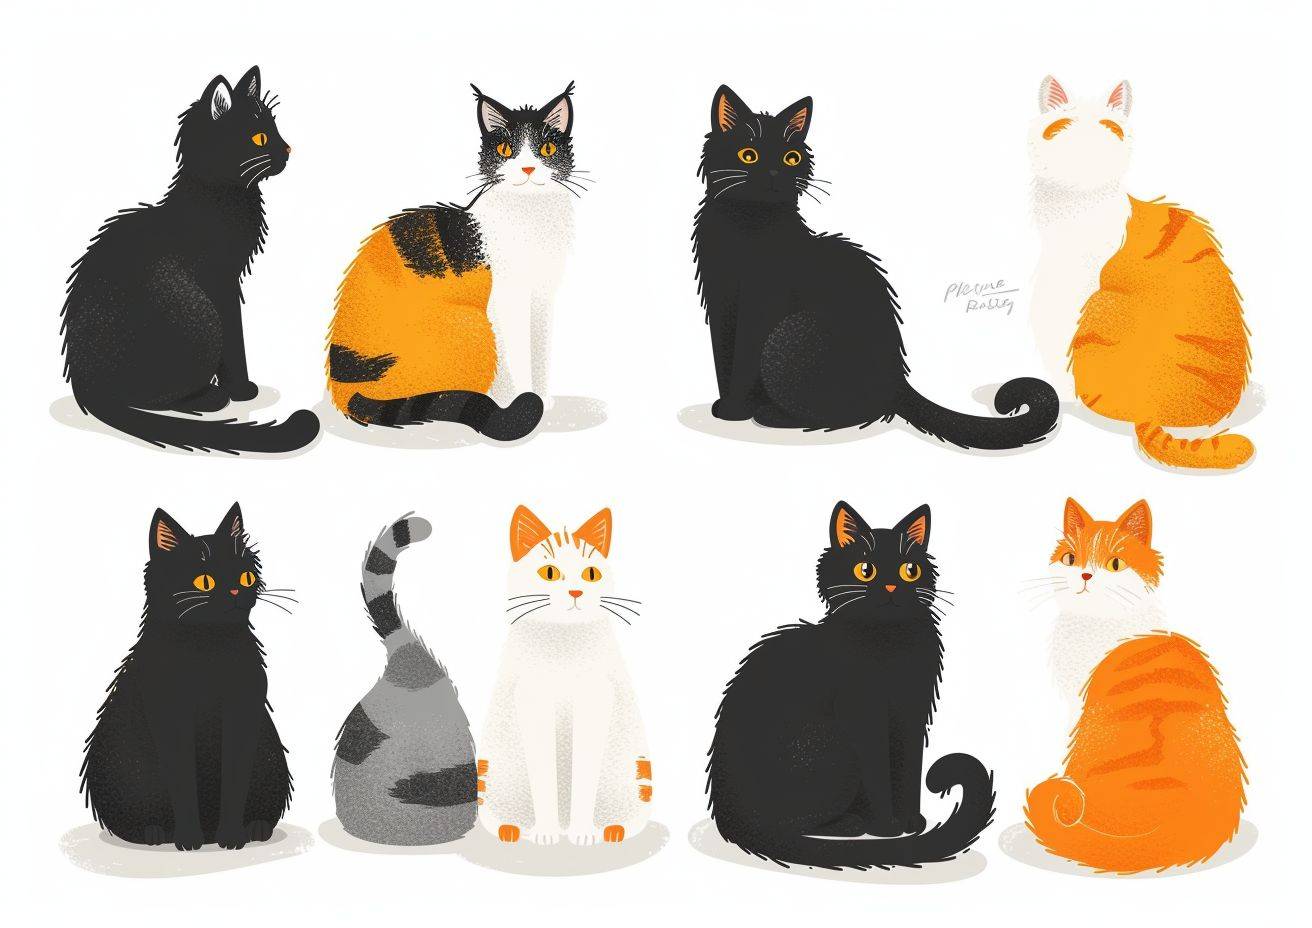 Fluffy cartoon drawing of different cat breeds on a white background in different color squares, with a raw style, aspect ratio of 7:5, frame rate of 6, and stylize level of 250.